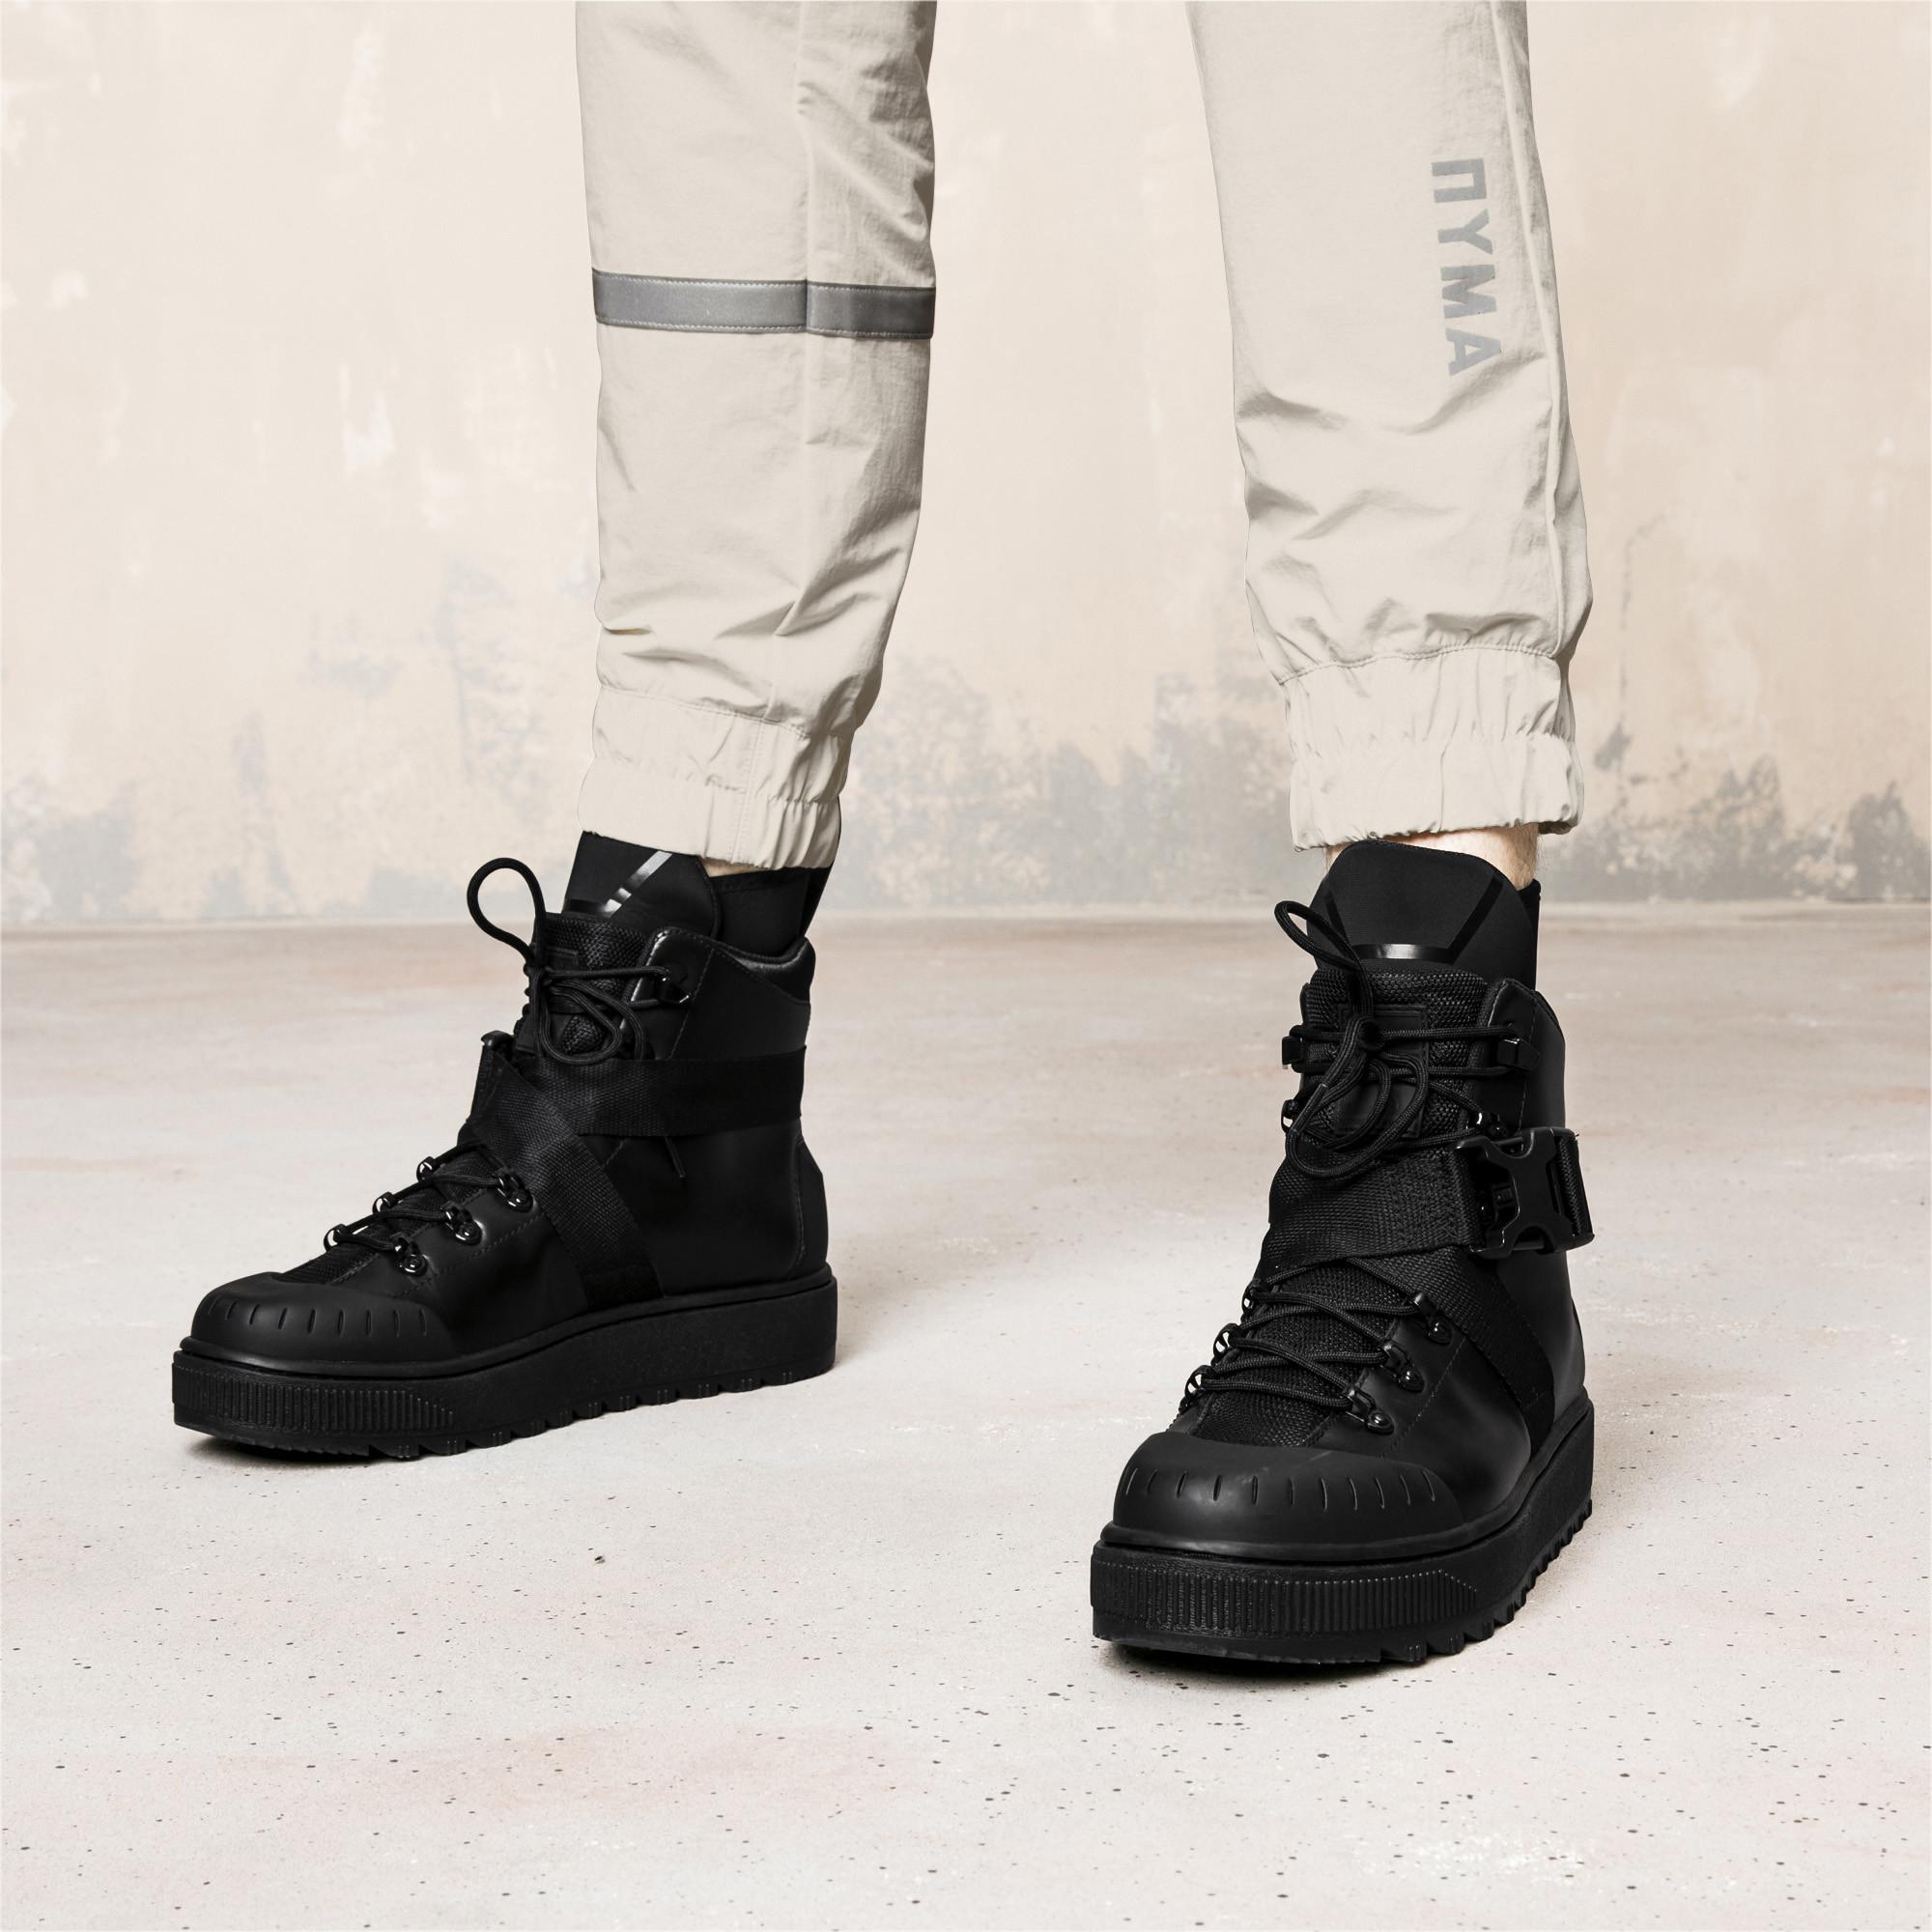 PUMA X Outlaw Moscow Ren Boots in Black for Men | Lyst